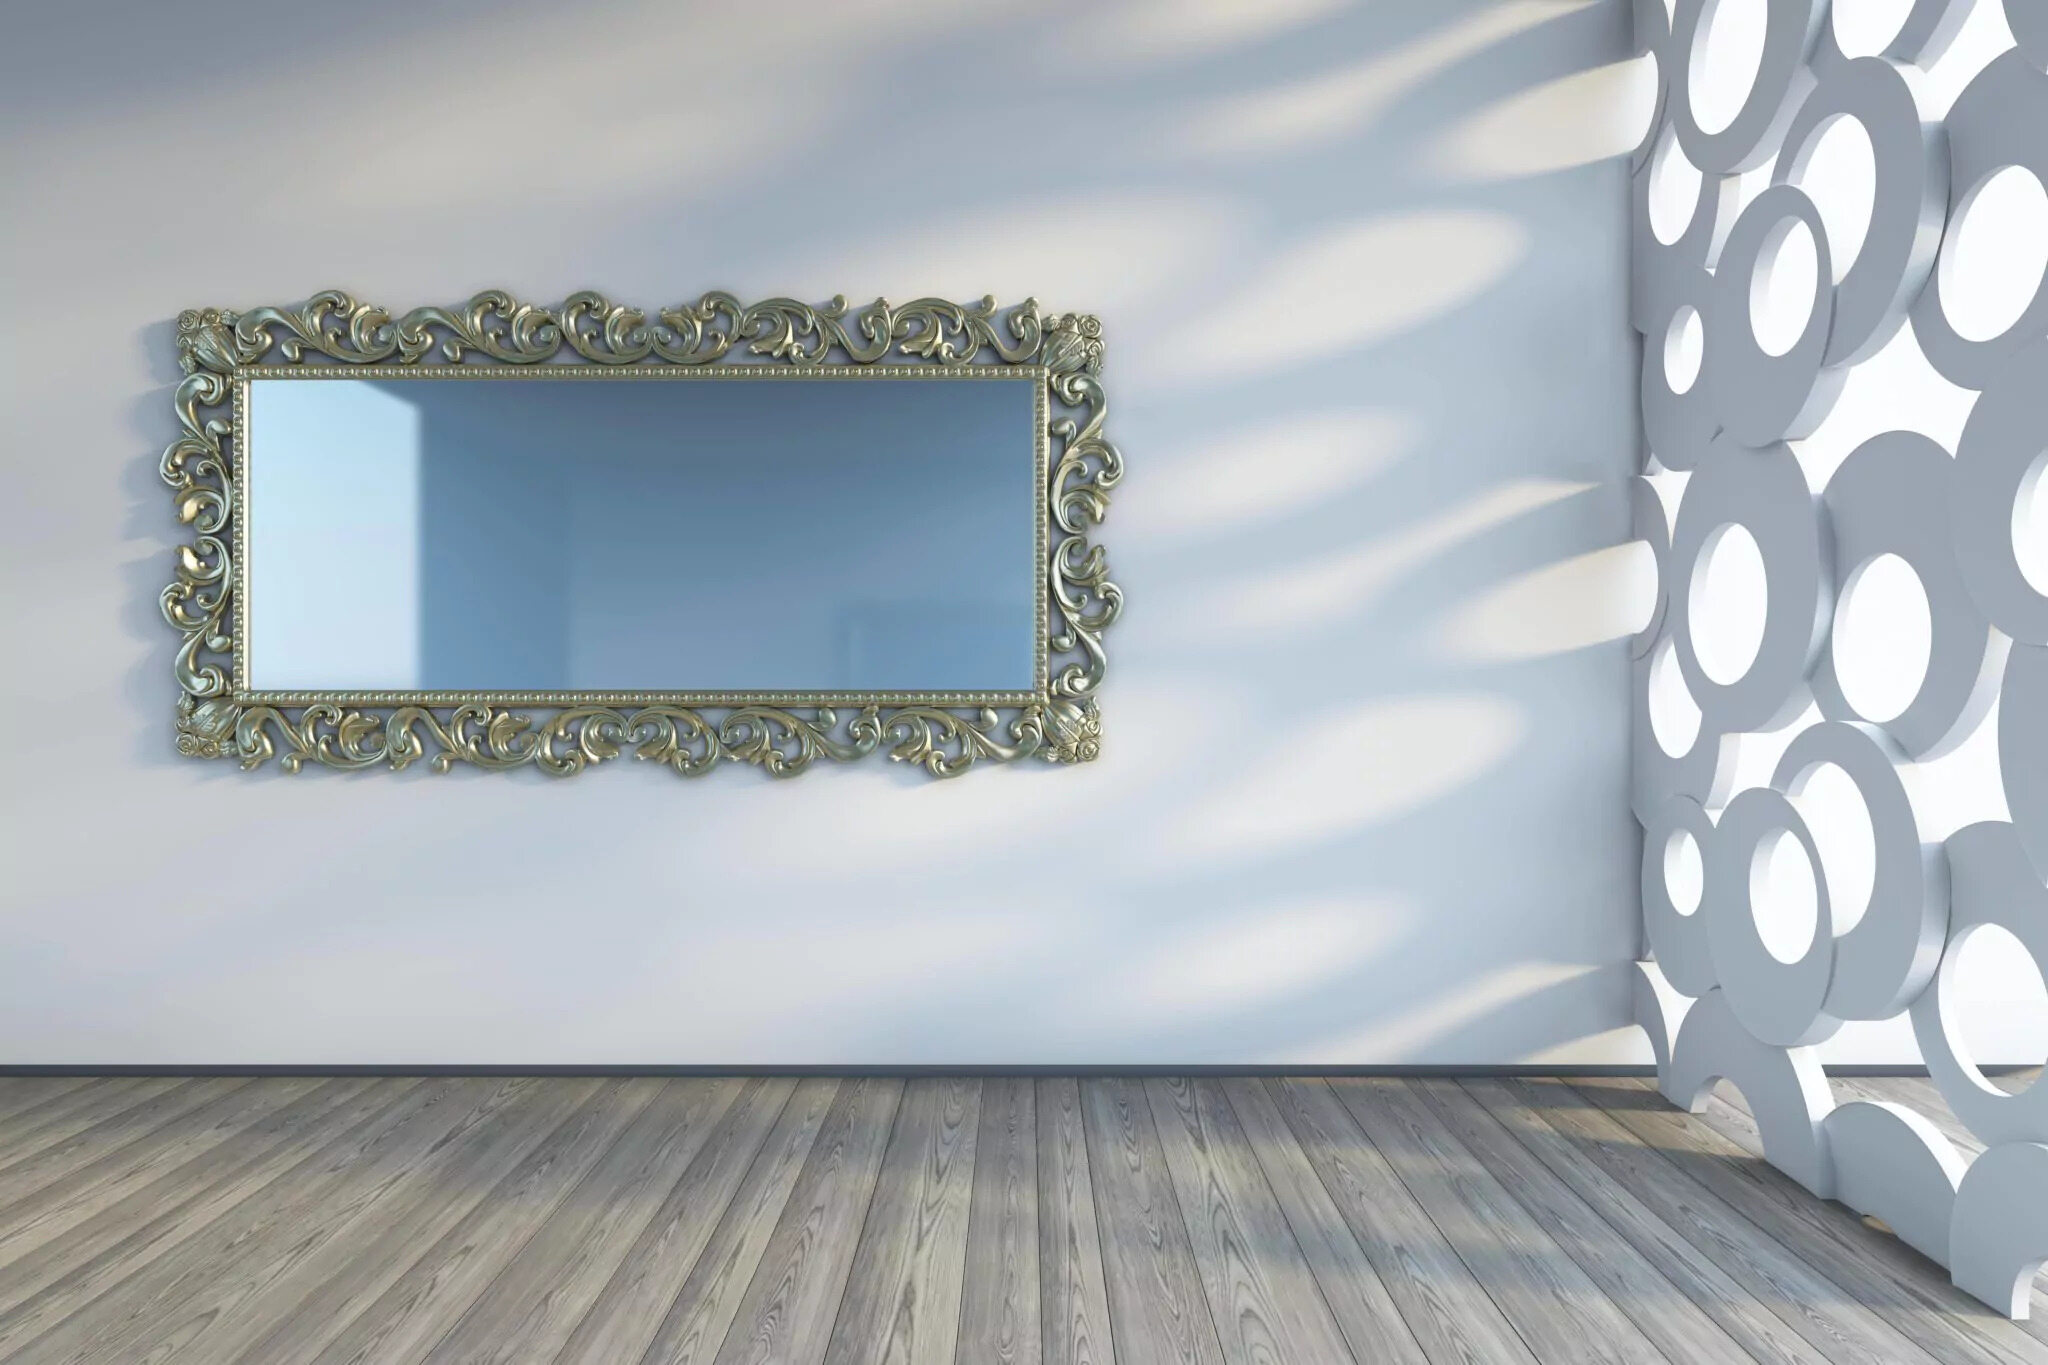 How To Hang Heavy Mirror On Wall